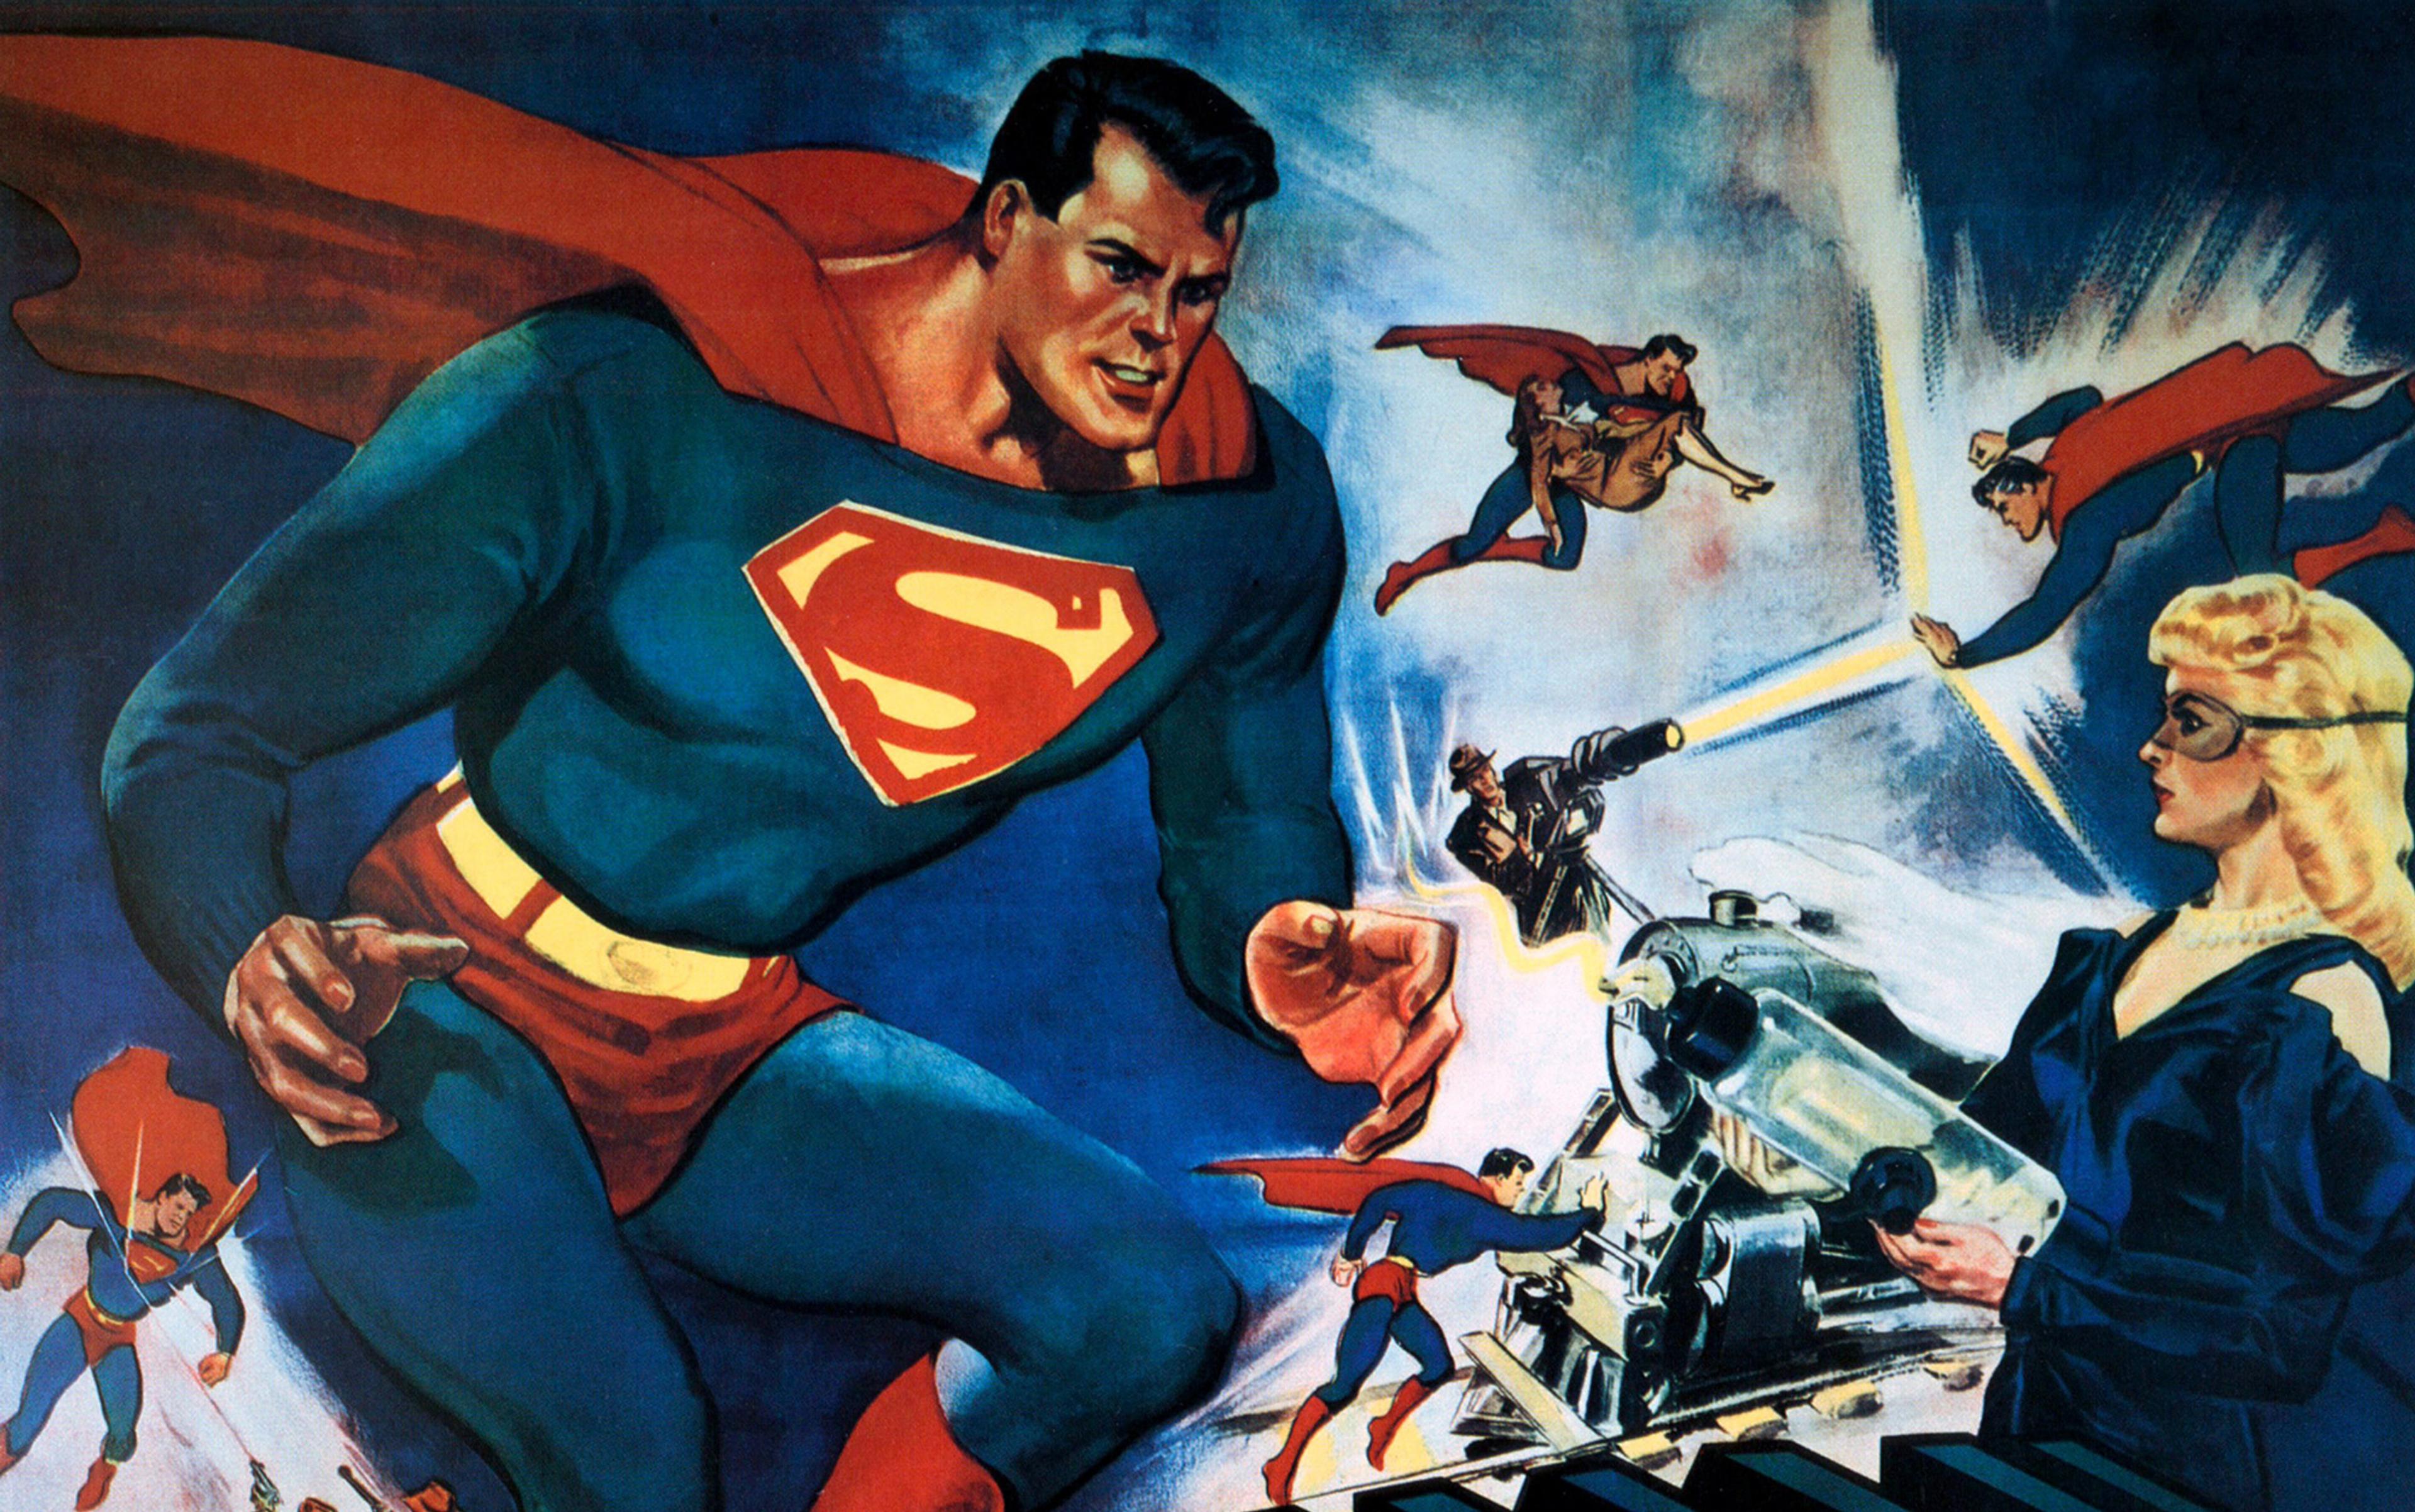 Superman really will save us: We are all superheroes!